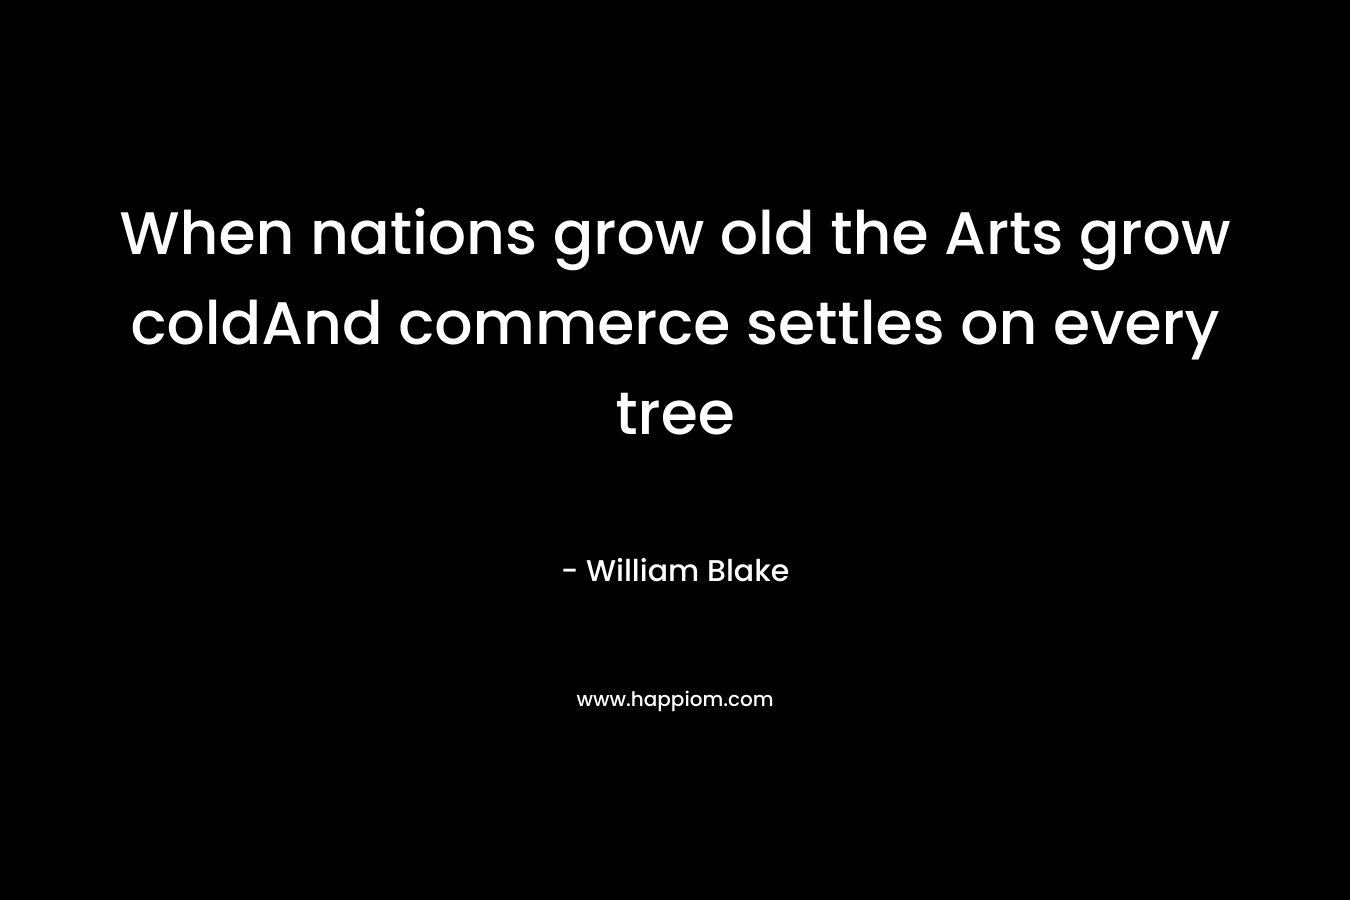 When nations grow old the Arts grow coldAnd commerce settles on every tree